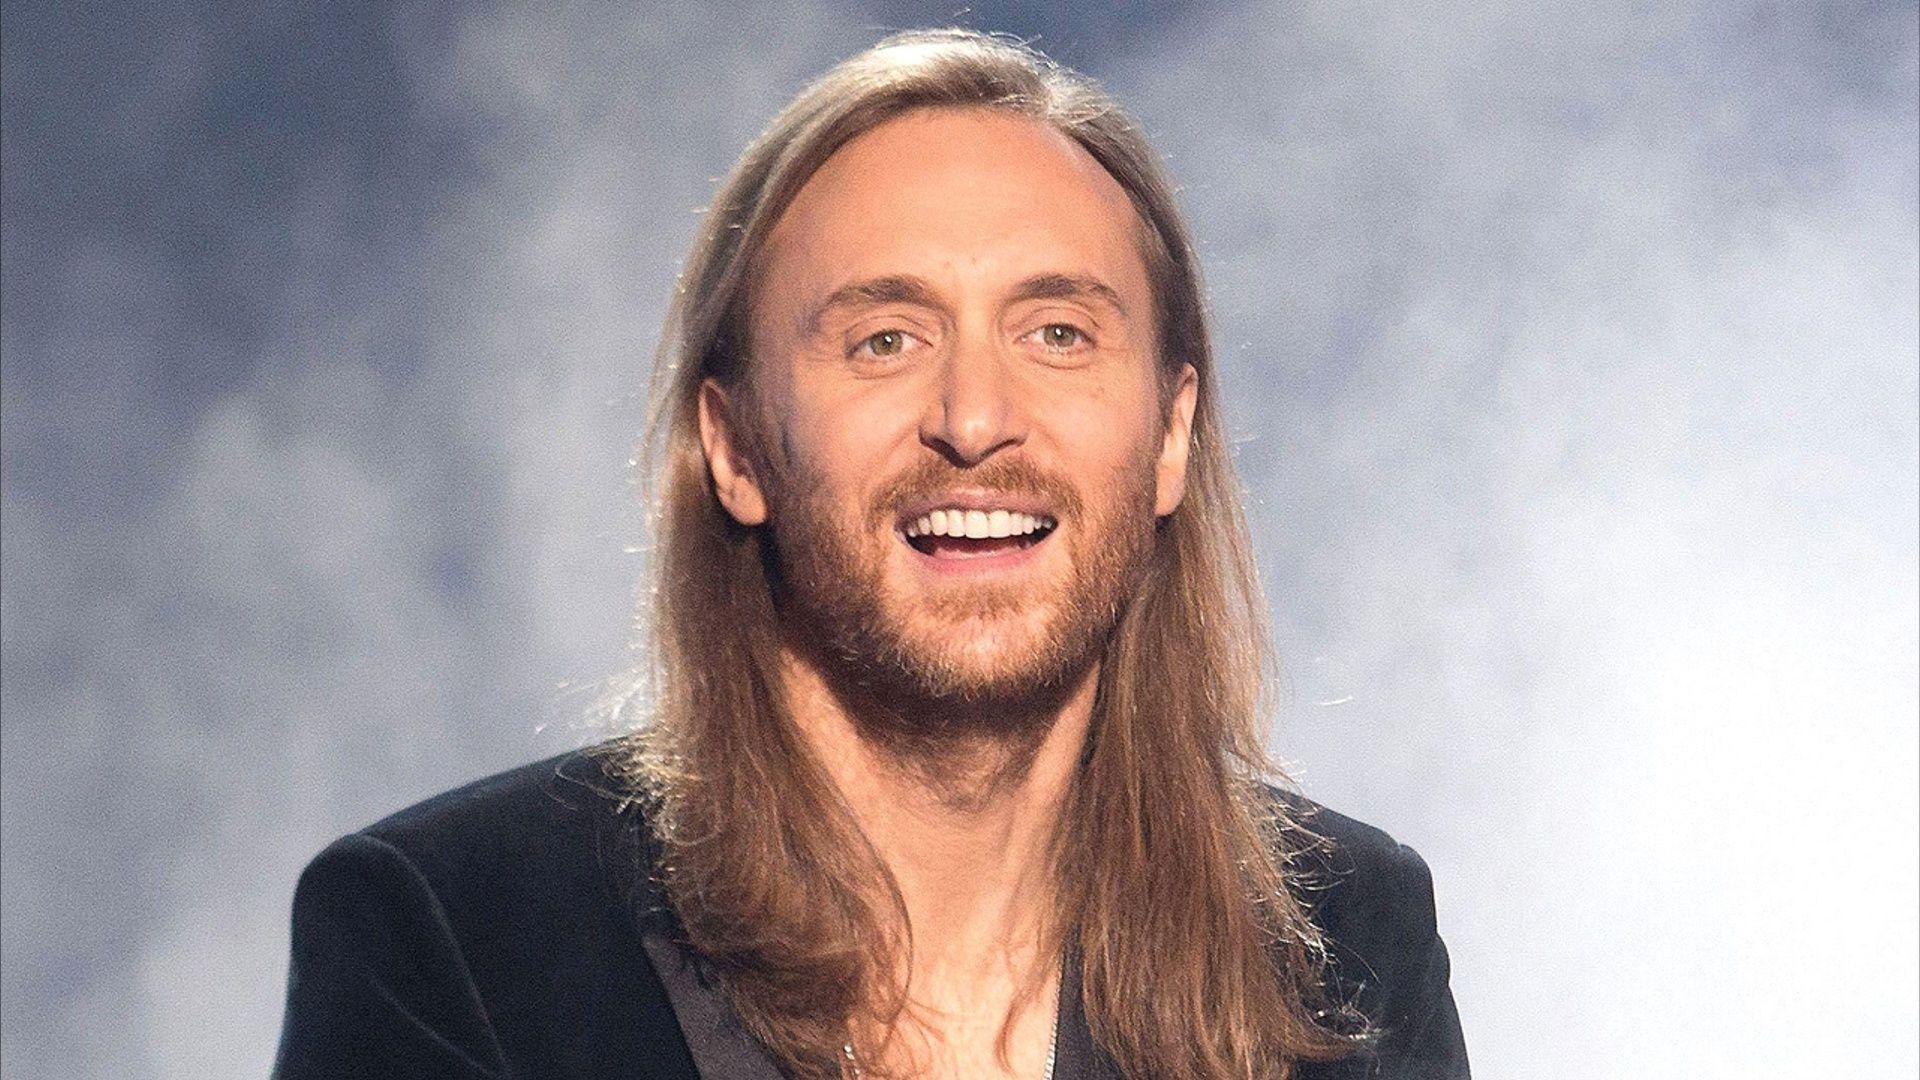 David Guetta releases a songbook featuring his biggest tracks